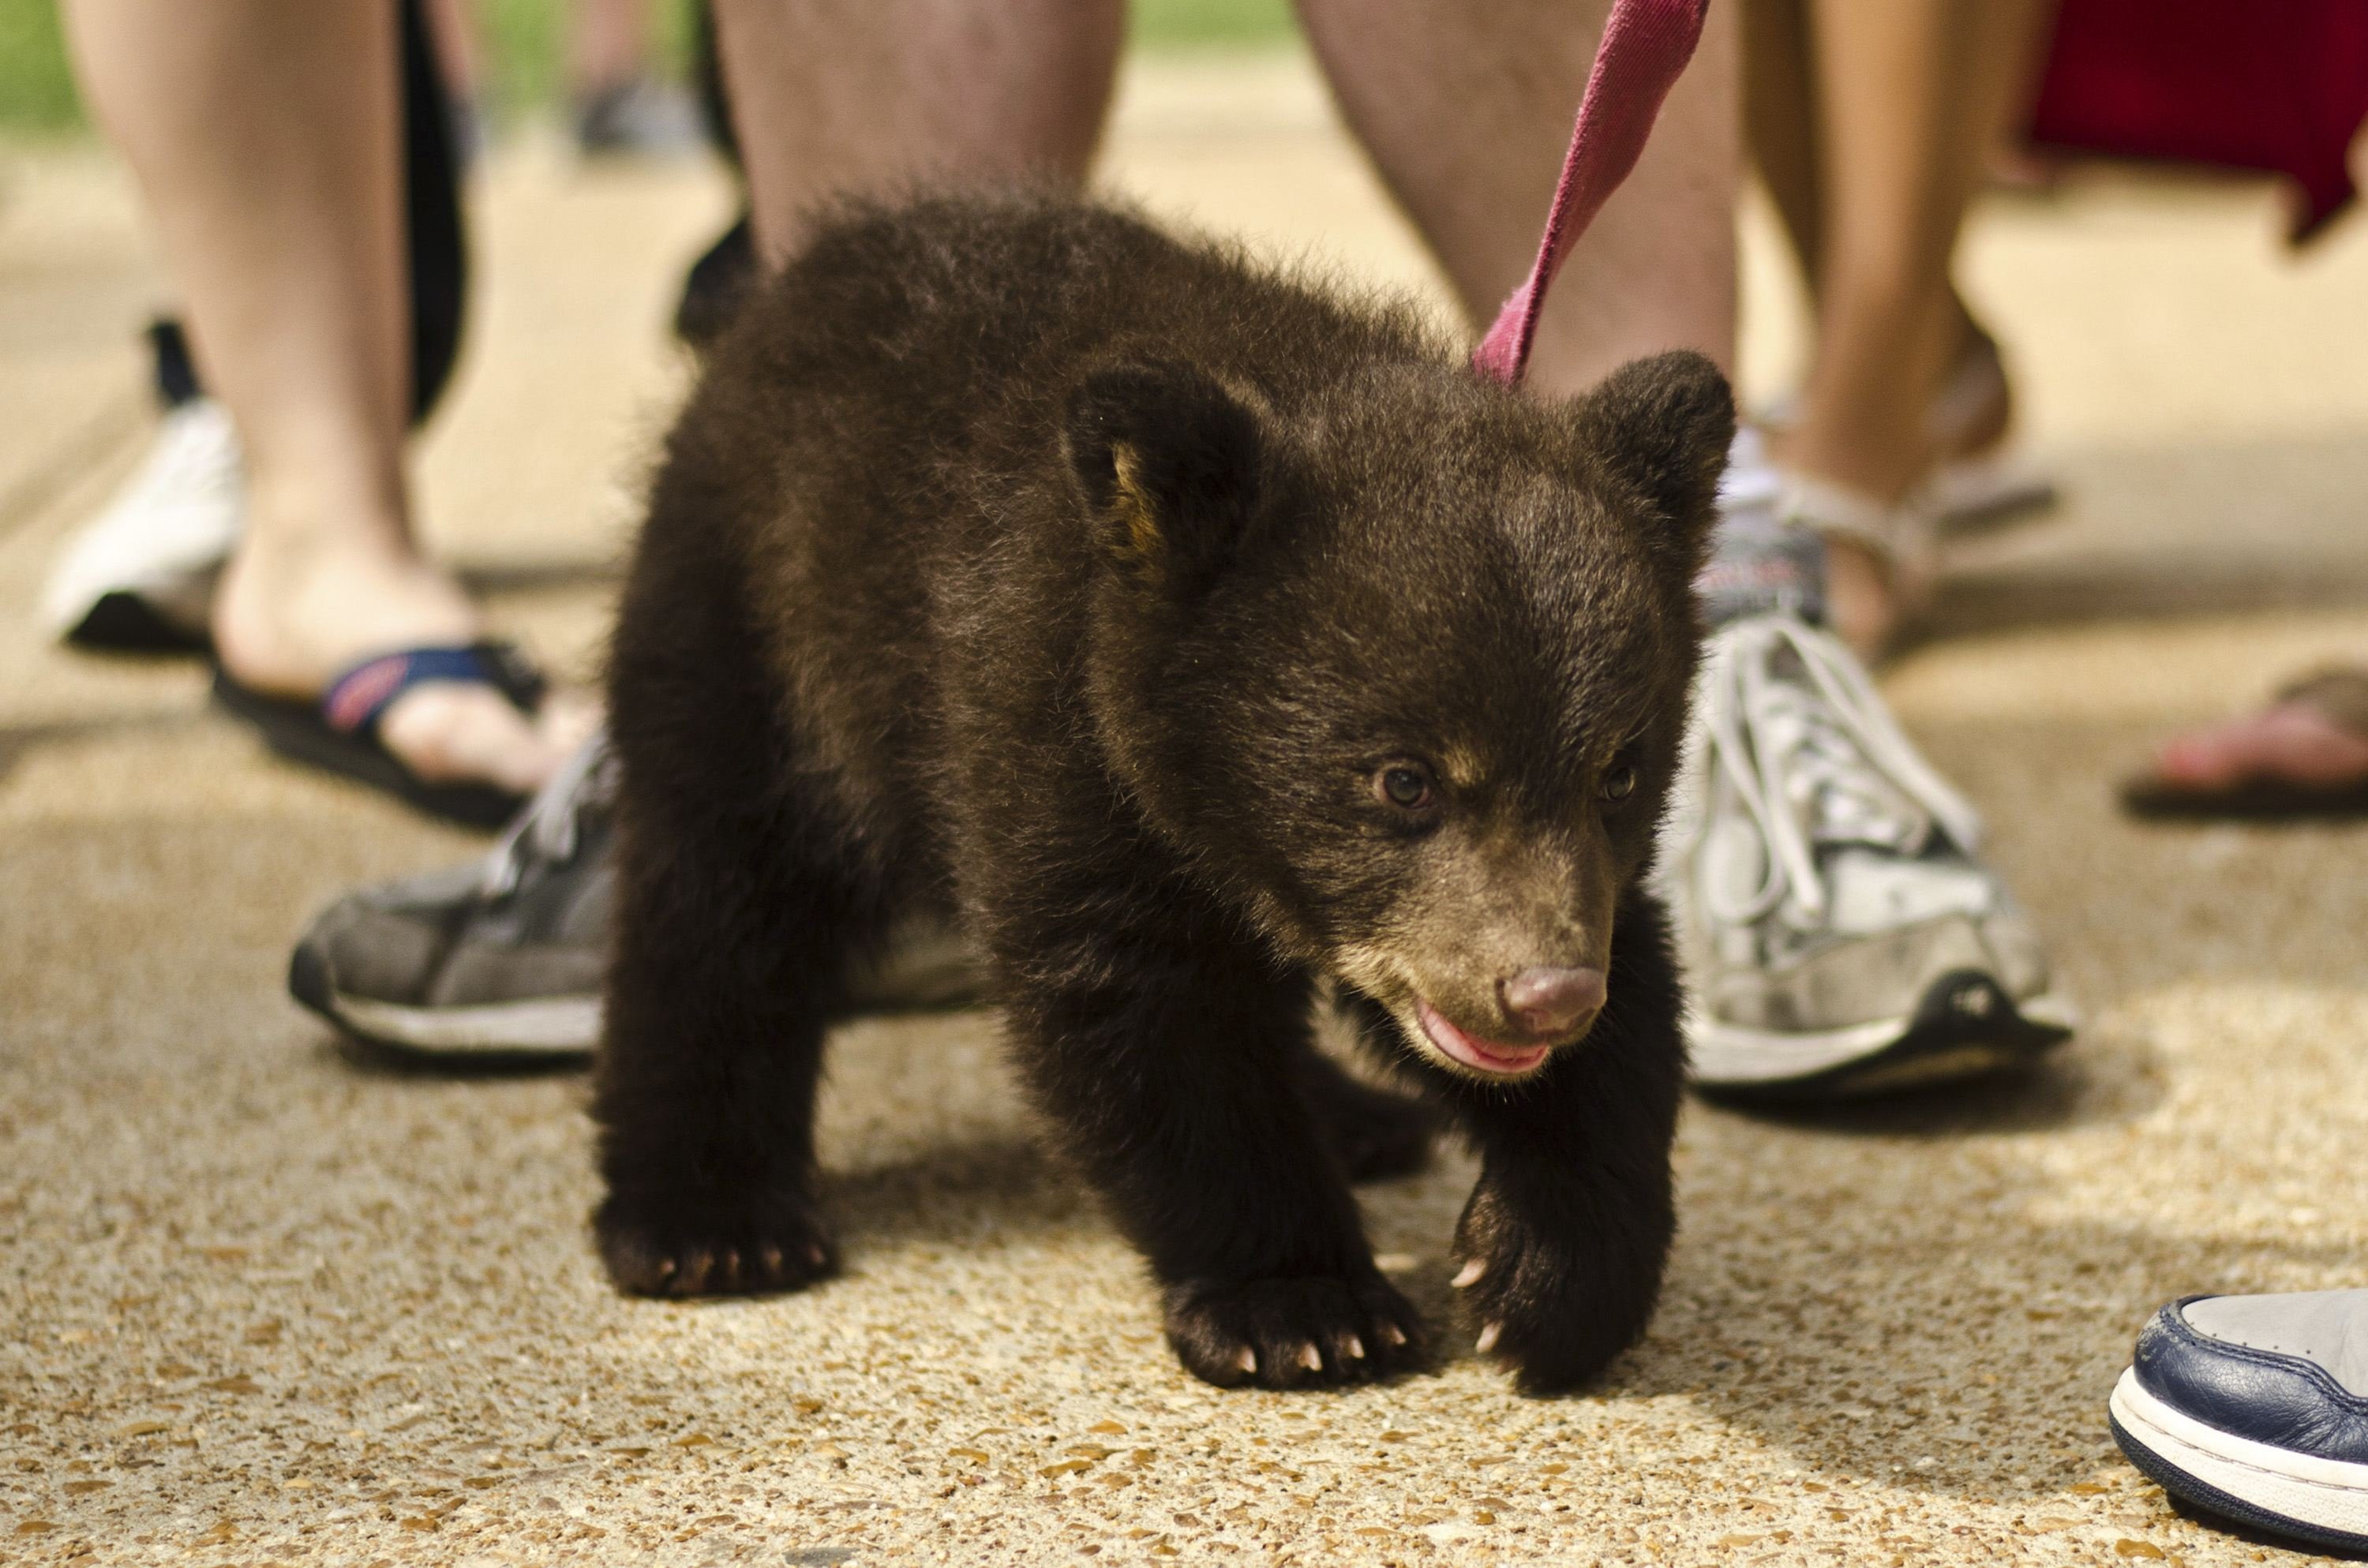 A two-month-old bear cub named Boo Boo is led on a leash by a student at Washington University in St. Louis, Missouri in this handout picture taken April 26, 2014. The cub was brought to the campus from a petting zoo to help students relax before final exams and ending up biting and scratching at least 18 students. Late on the afternoon of May 2, the university issued a news release stating that health officials determined that Boo Boo posed no rabies threat and that students will need no treatments. Picture taken April 26, 2014. REUTERS/Mary Gail Richardson/Handout via Reuters (UNITED STATES - Tags: ANIMALS SOCIETY EDUCATION) 
                        
                        ATTENTION EDITORS - THIS PICTURE WAS PROVIDED BY A THIRD PARTY. REUTERS IS UNABLE TO INDEPENDENTLY VERIFY THE AUTHENTICITY, CONTENT, LOCATION OR DATE OF THIS IMAGE. FOR EDITORIAL USE ONLY. NOT FOR SALE FOR MARKETING OR ADVERTISING CAMPAIGNS. NO SALES. NO ARCHIVES. THIS PICTURE IS DISTRIBUTED EXACTLY AS RECEIVED BY REUTERS, AS A SERVICE TO CLIENTS (Mary Gail Richardson / Reuters)